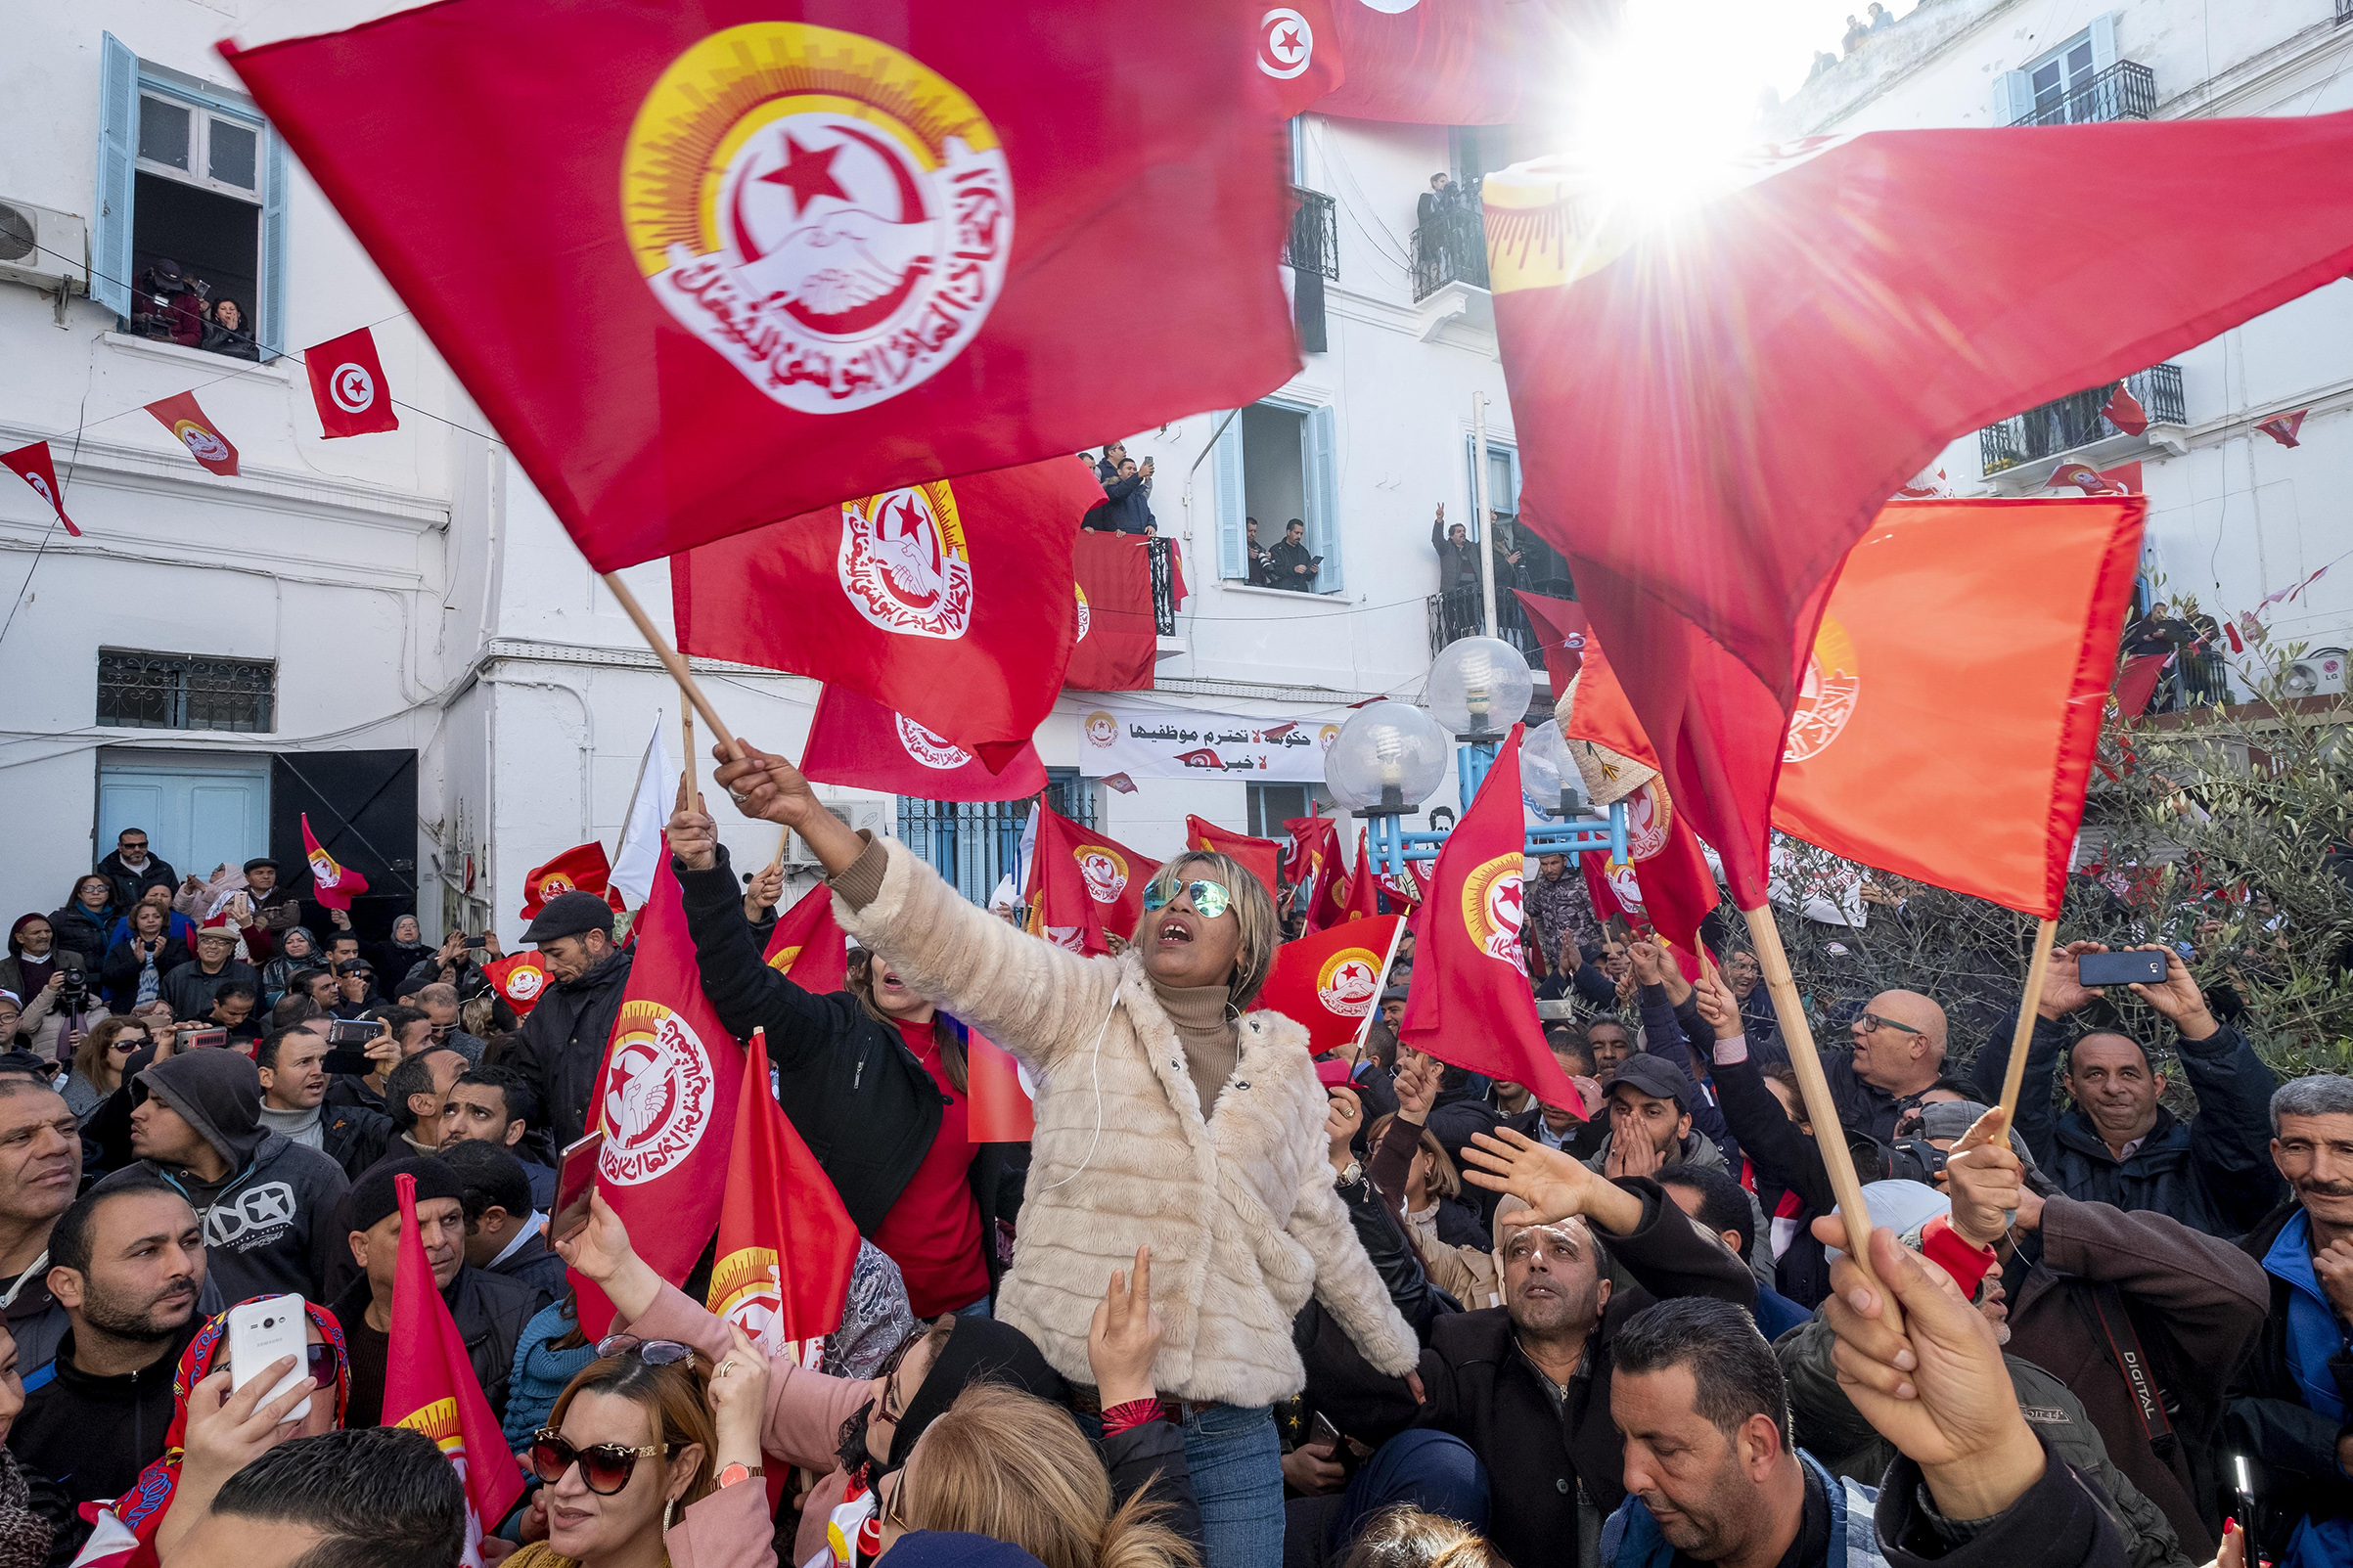 Civil Servants stage a protest within the public officials' strike, demanding the rise of their wage, after the strike call by Tunisian General Labour Union in Tunis, Tunisia on January 17, 2019. (Abaca Press&mdash;Fauque Nicolas/Images de Tunisie)